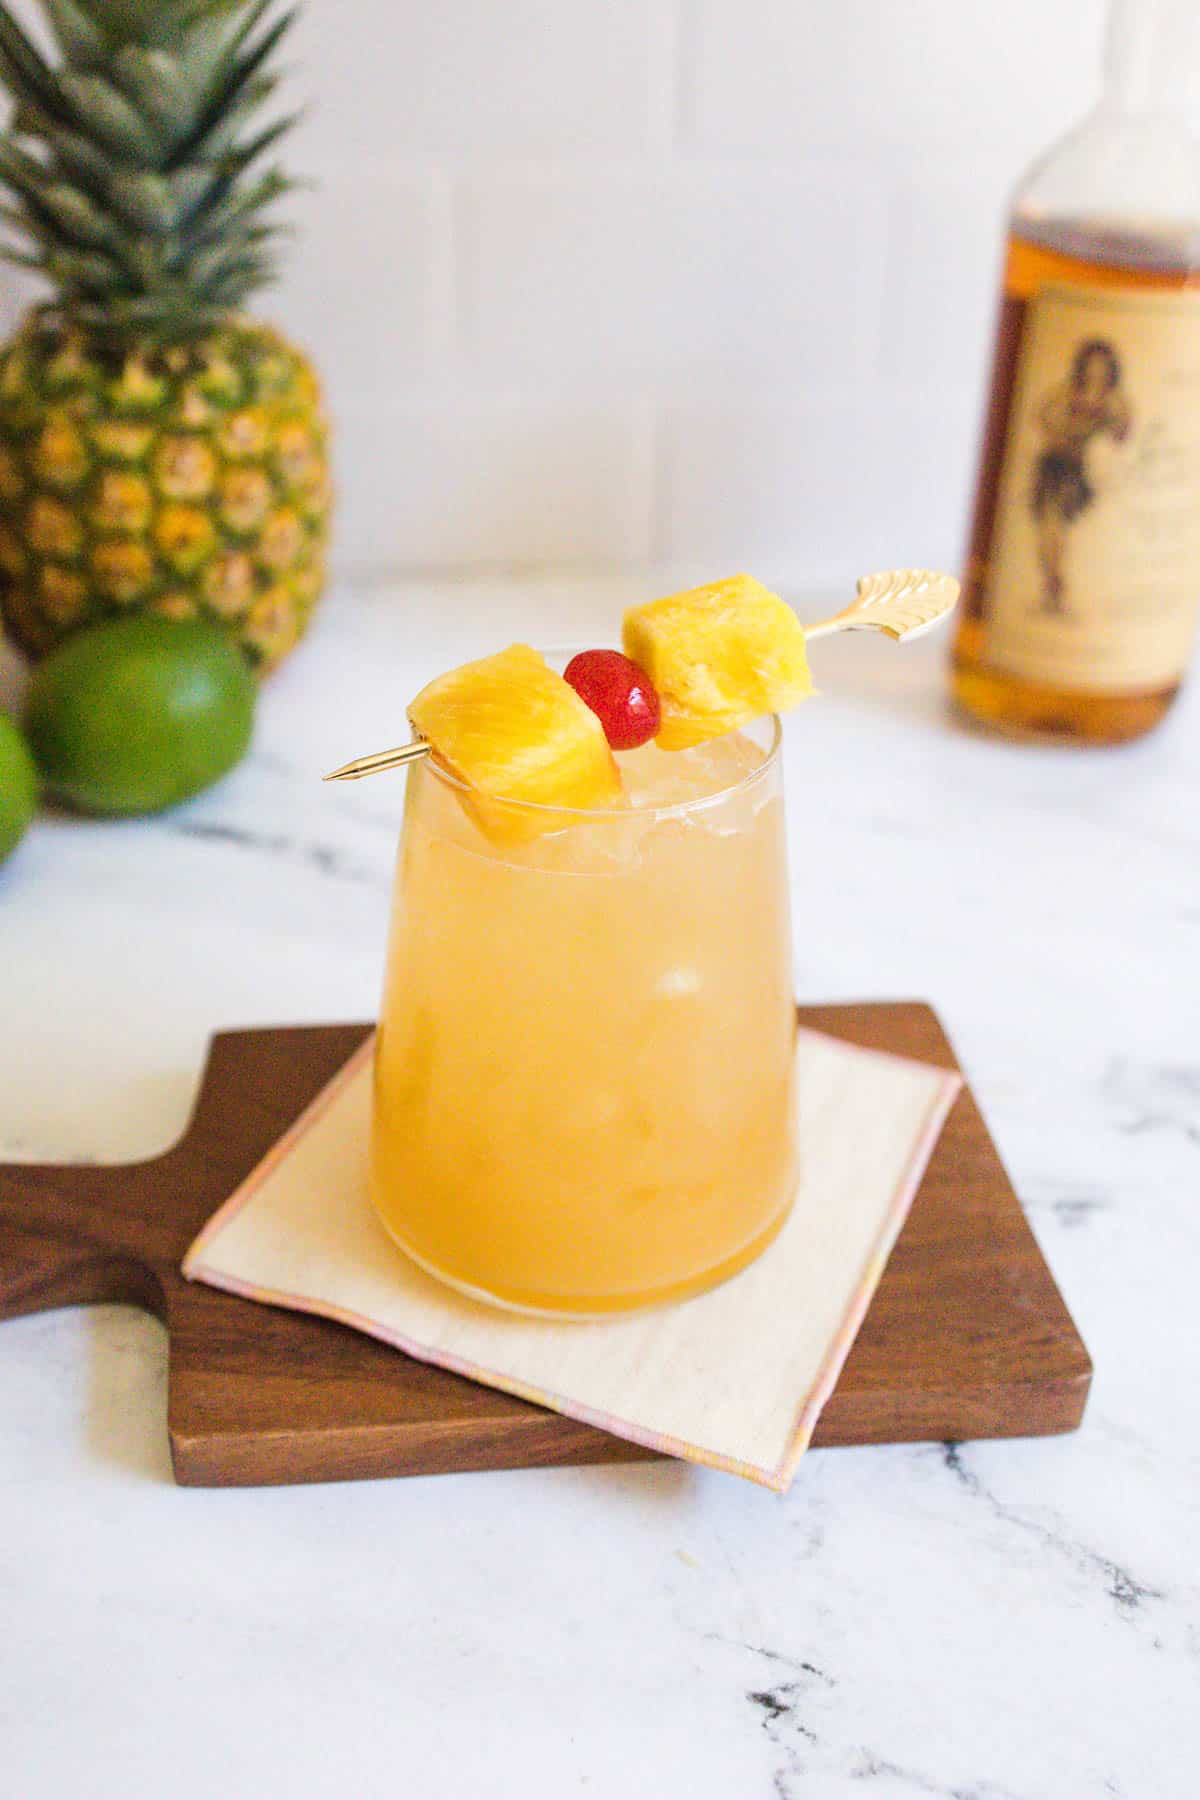 Wine rum pineapple cocktail on a wooden board.